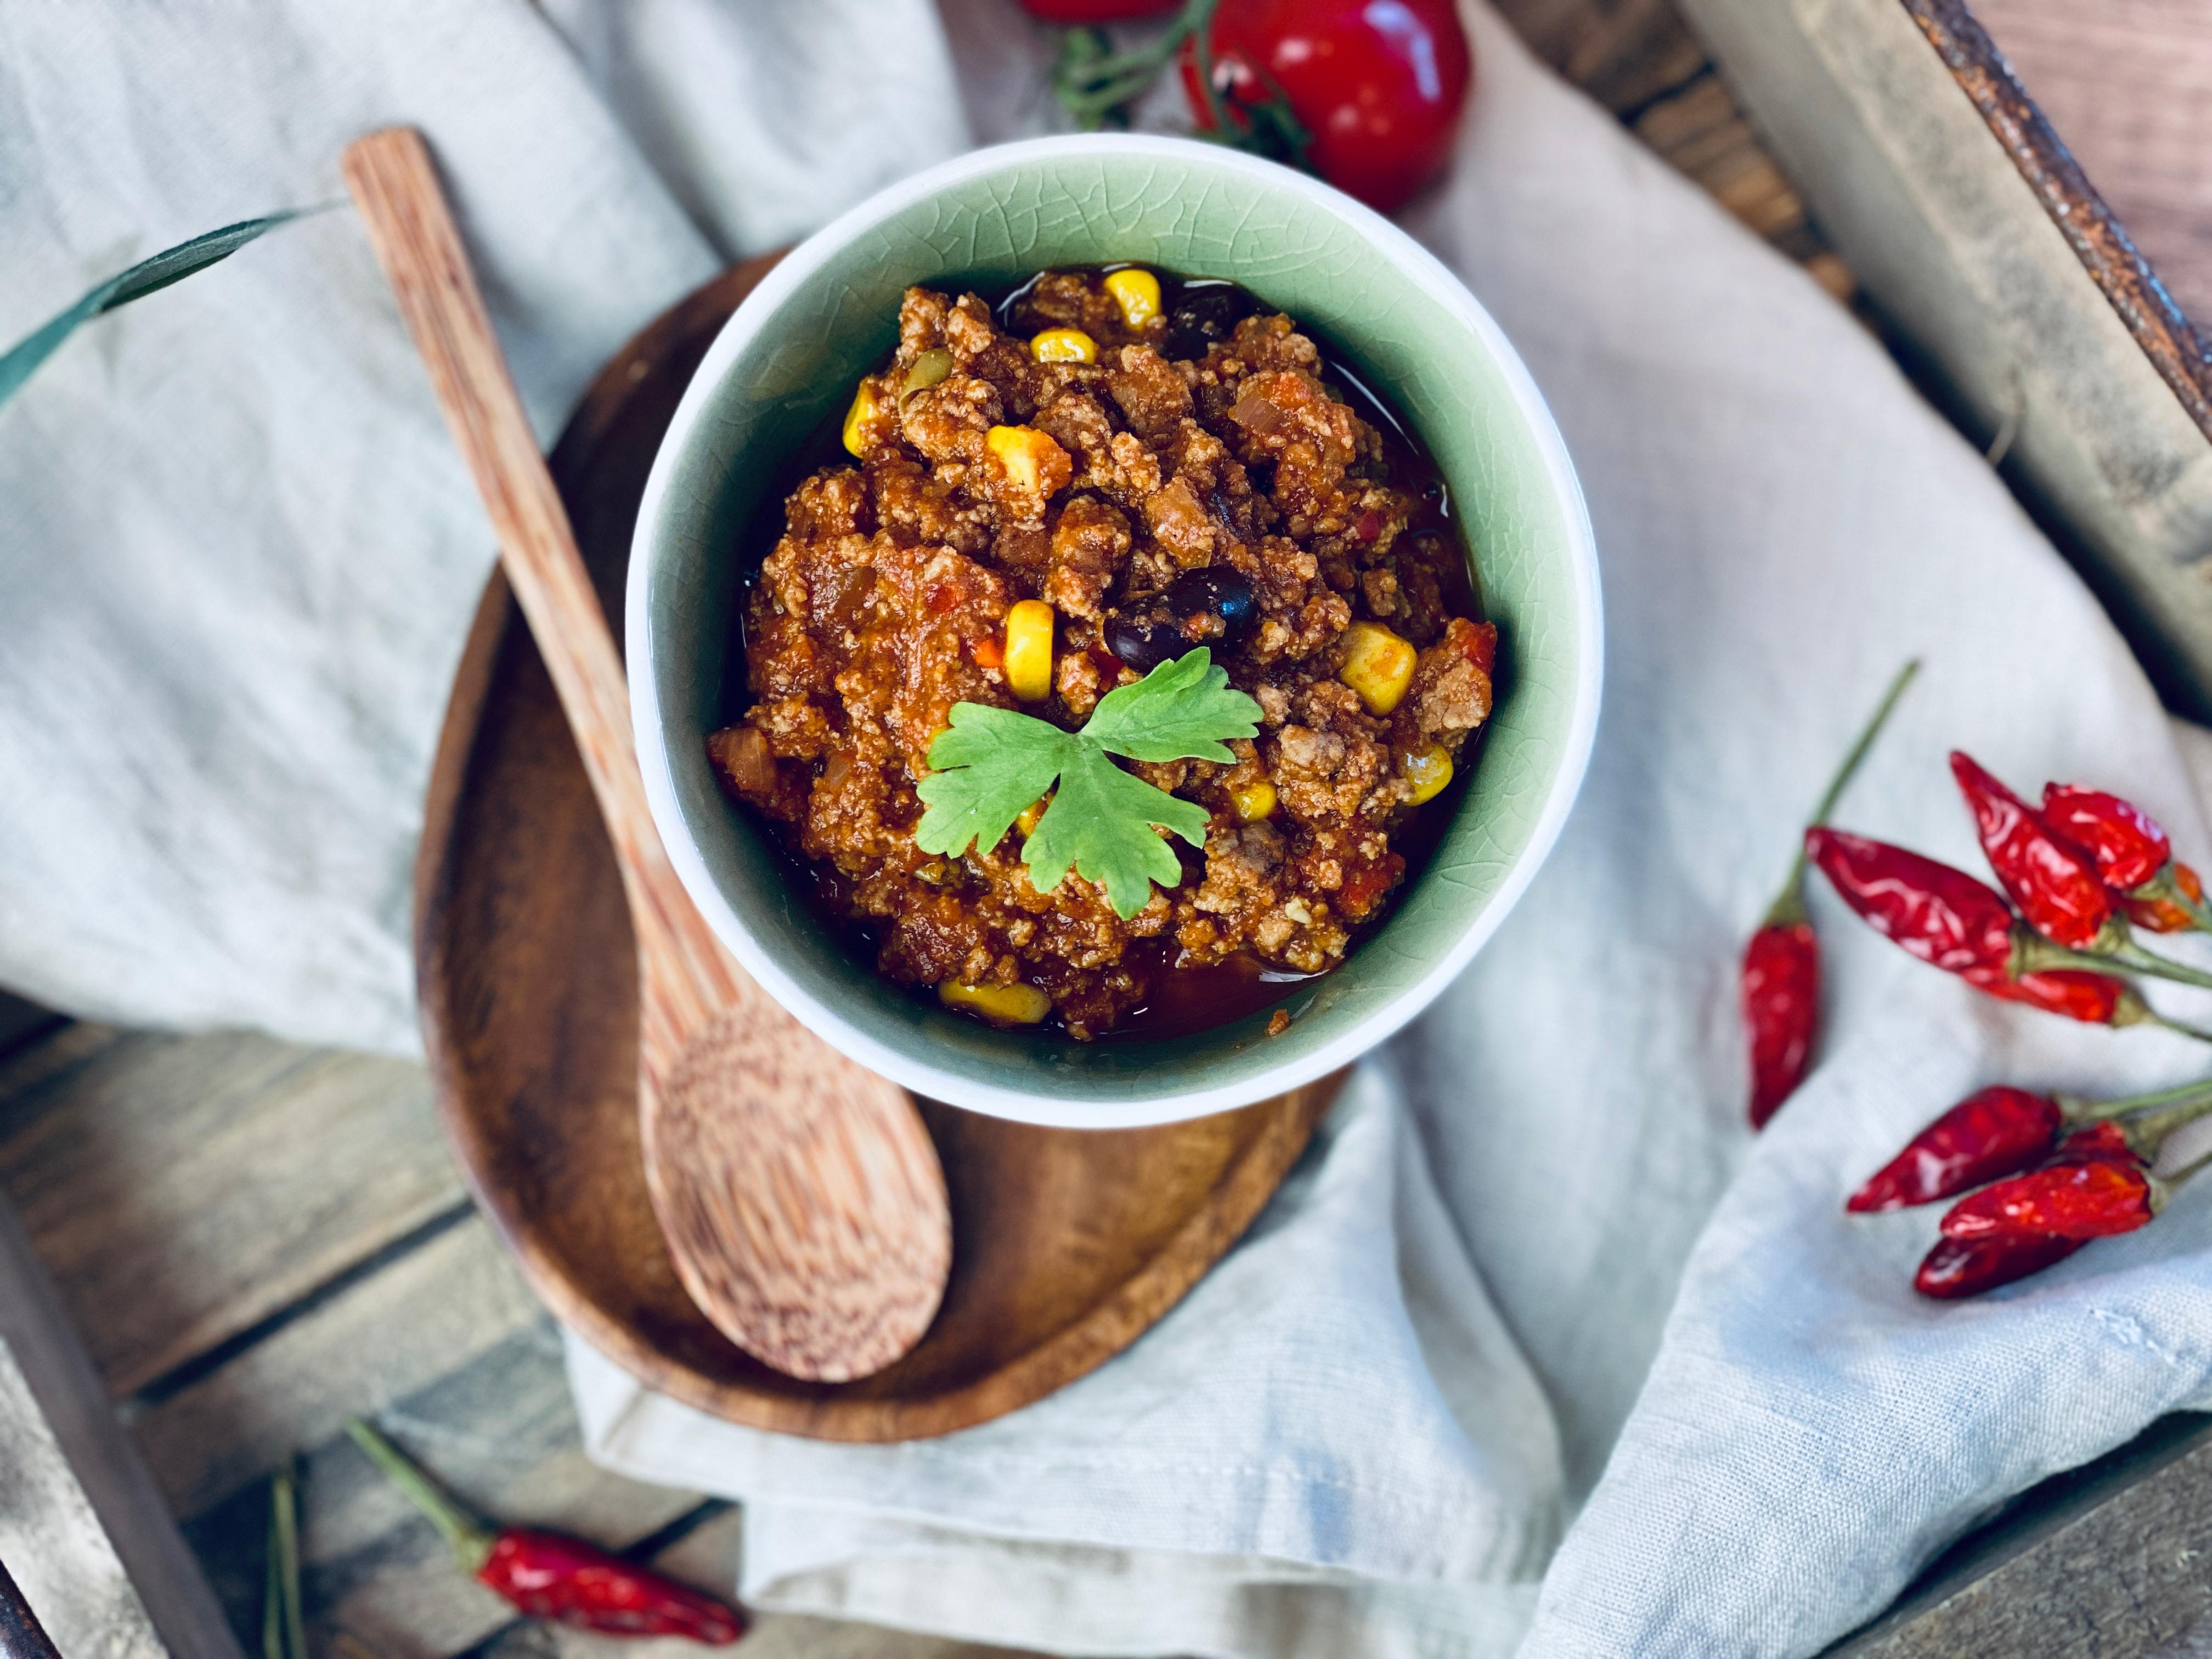 #partyfood #chili #chiliconcarne #foofd